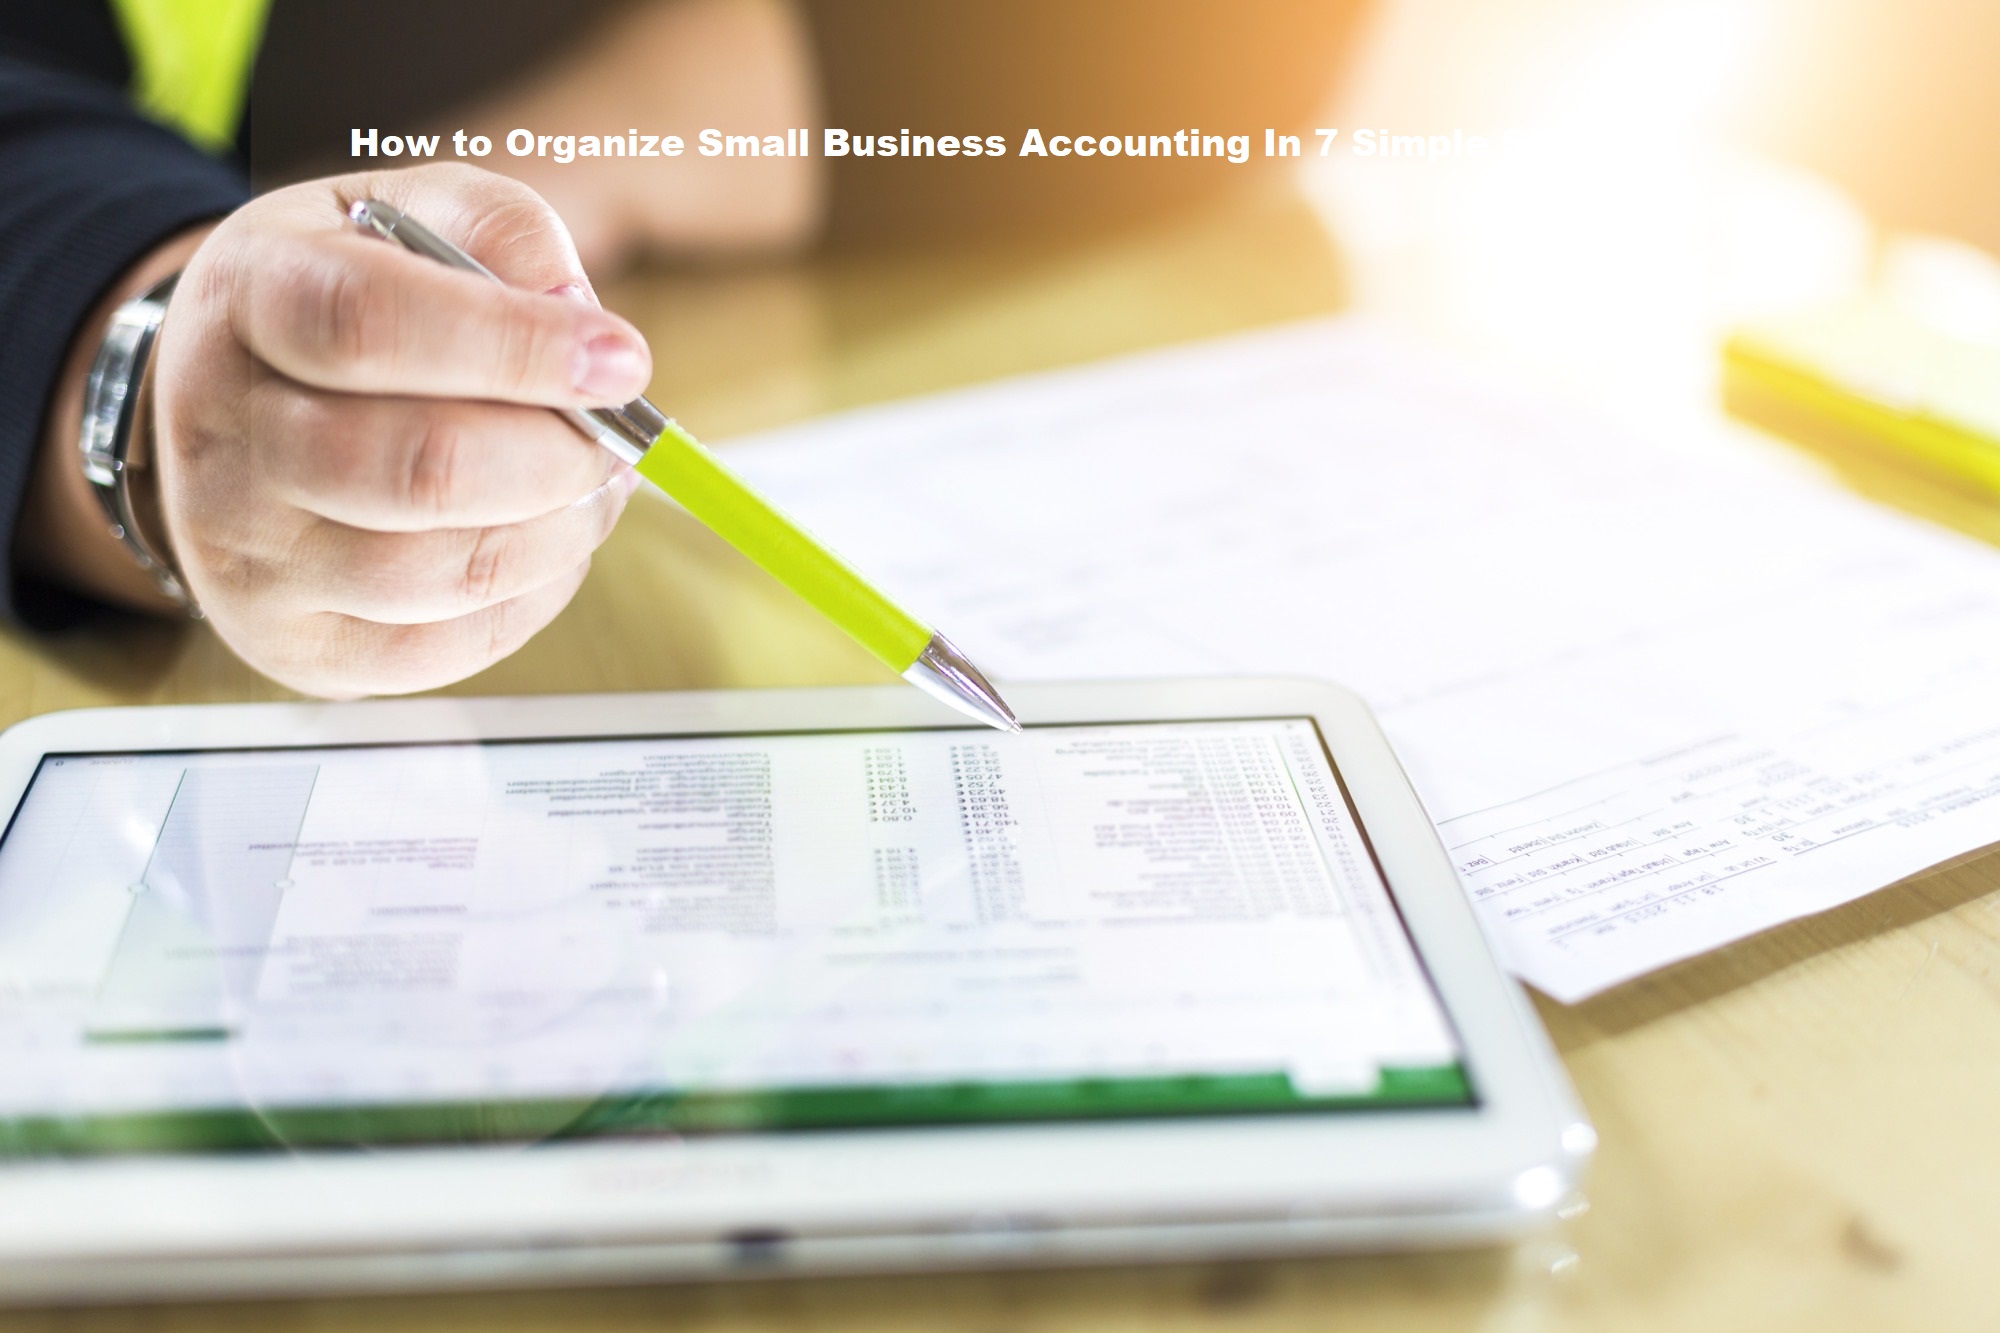 How to Organize Small Business Accounting In 7 Simple Steps 